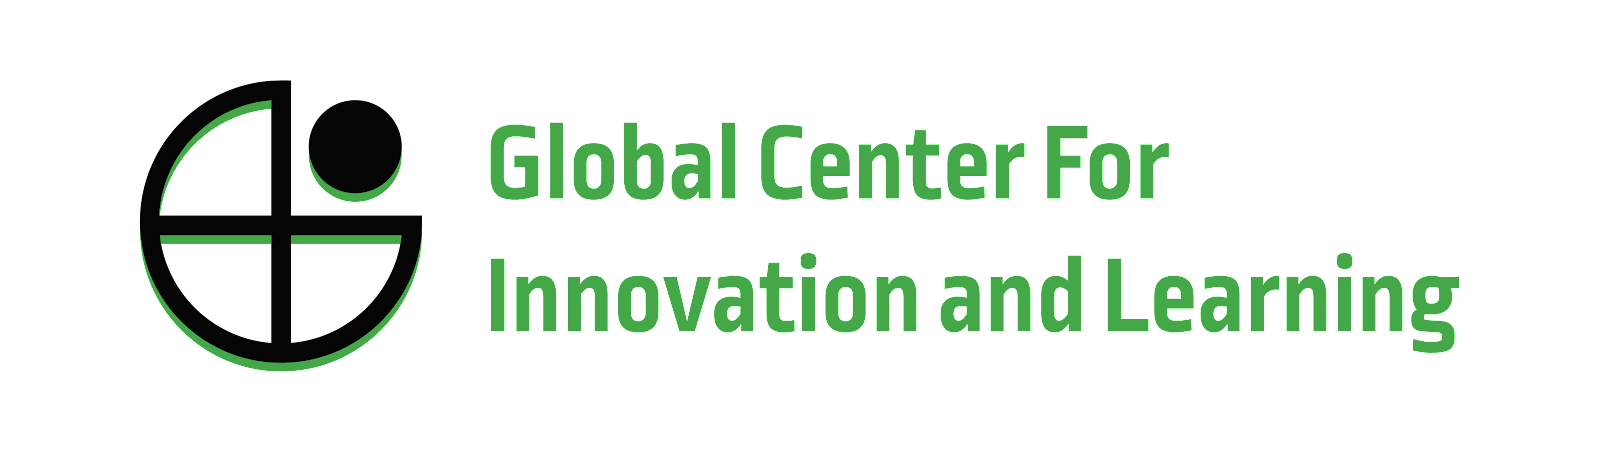 Global Center for Innovation and Learning (GCFIL - USA)